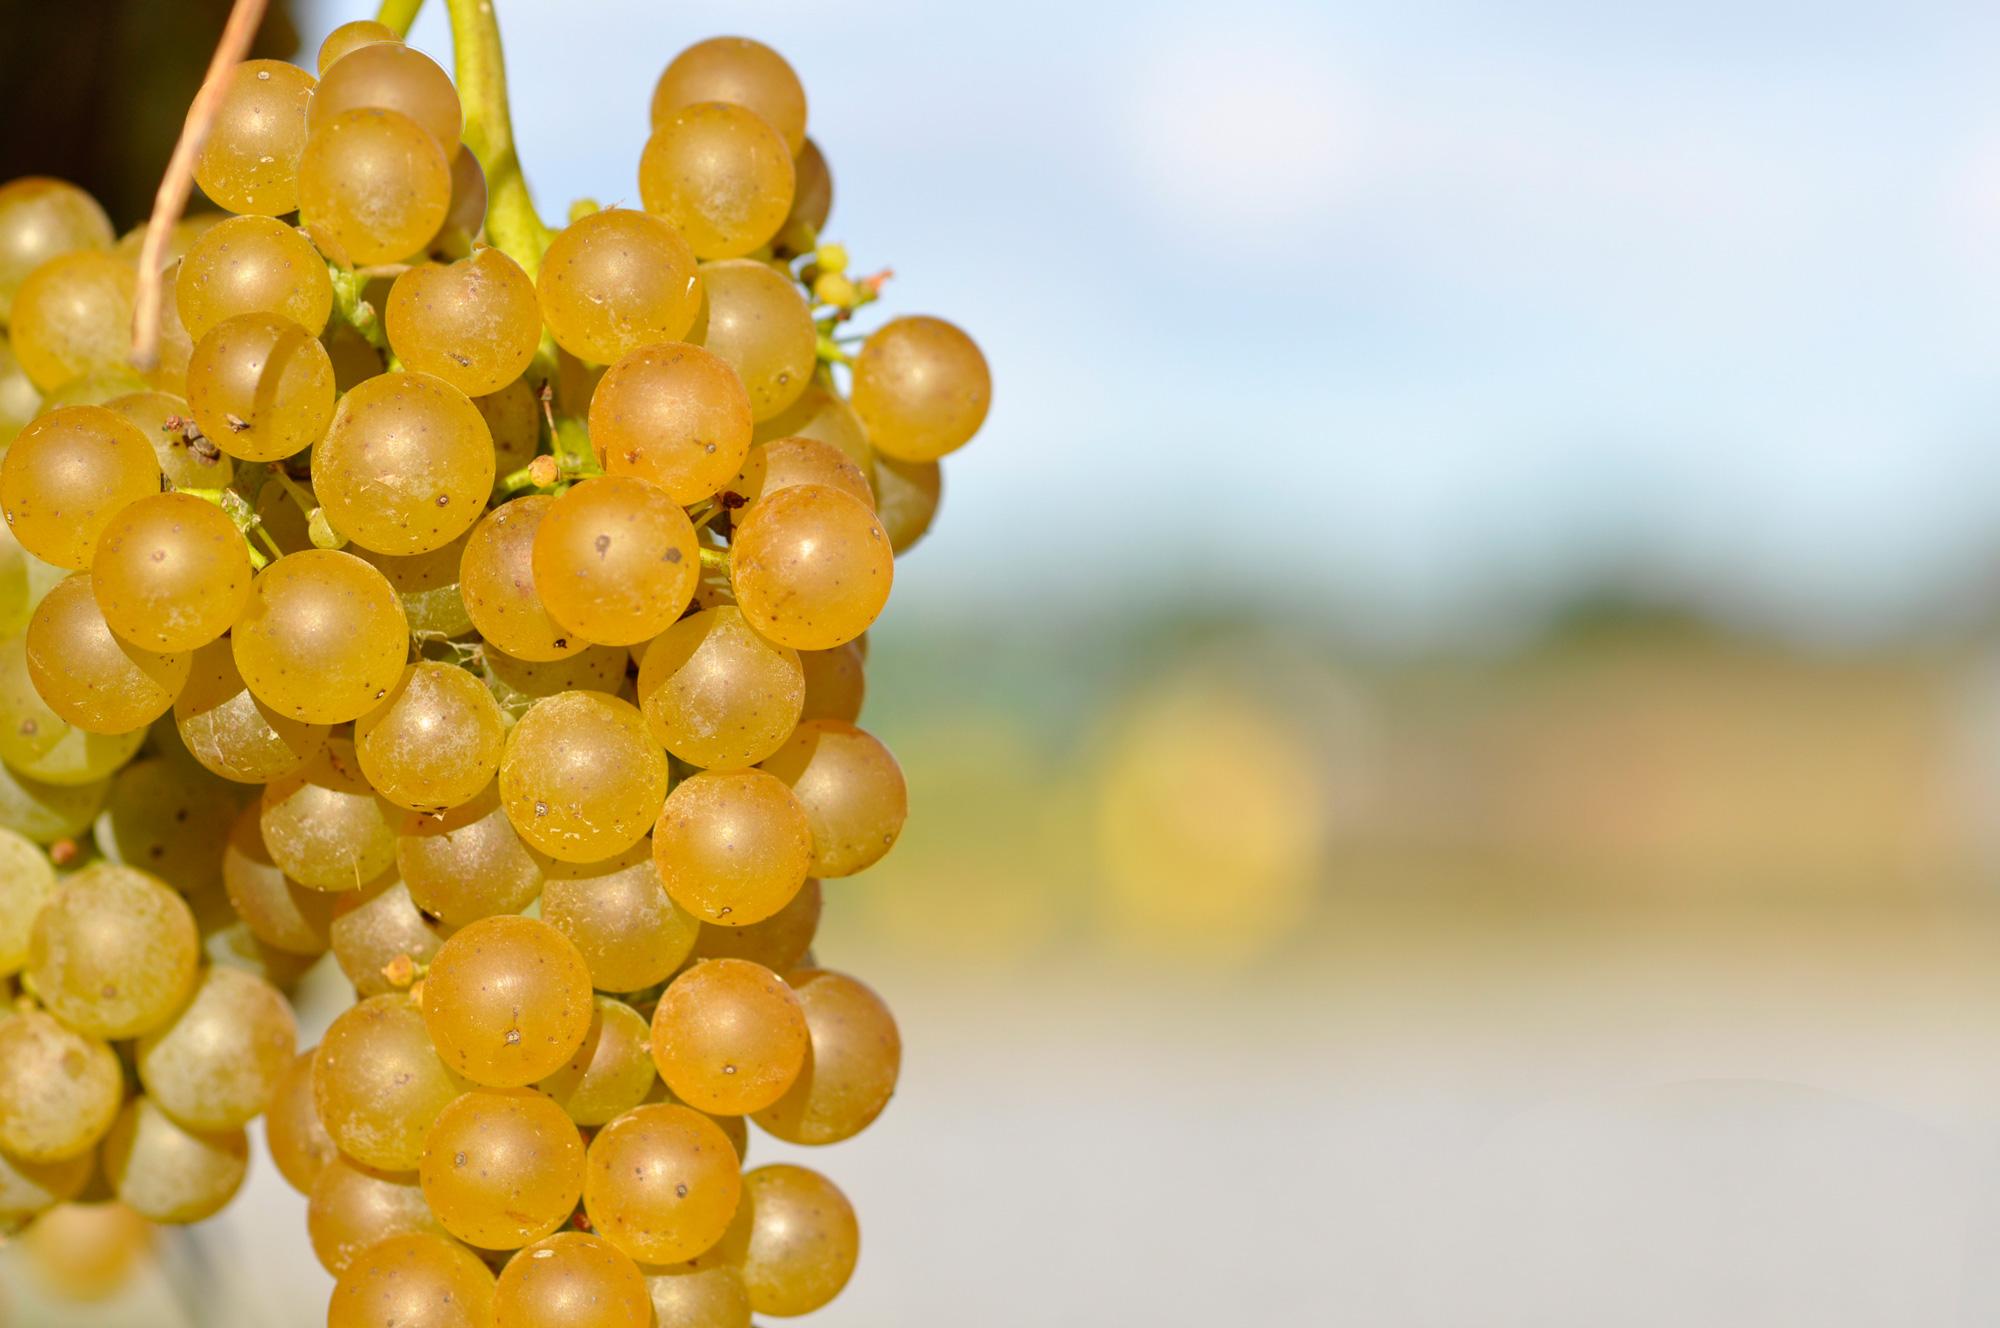 What Role Should Vidal Blanc Play in the Future of Maryland Wine?